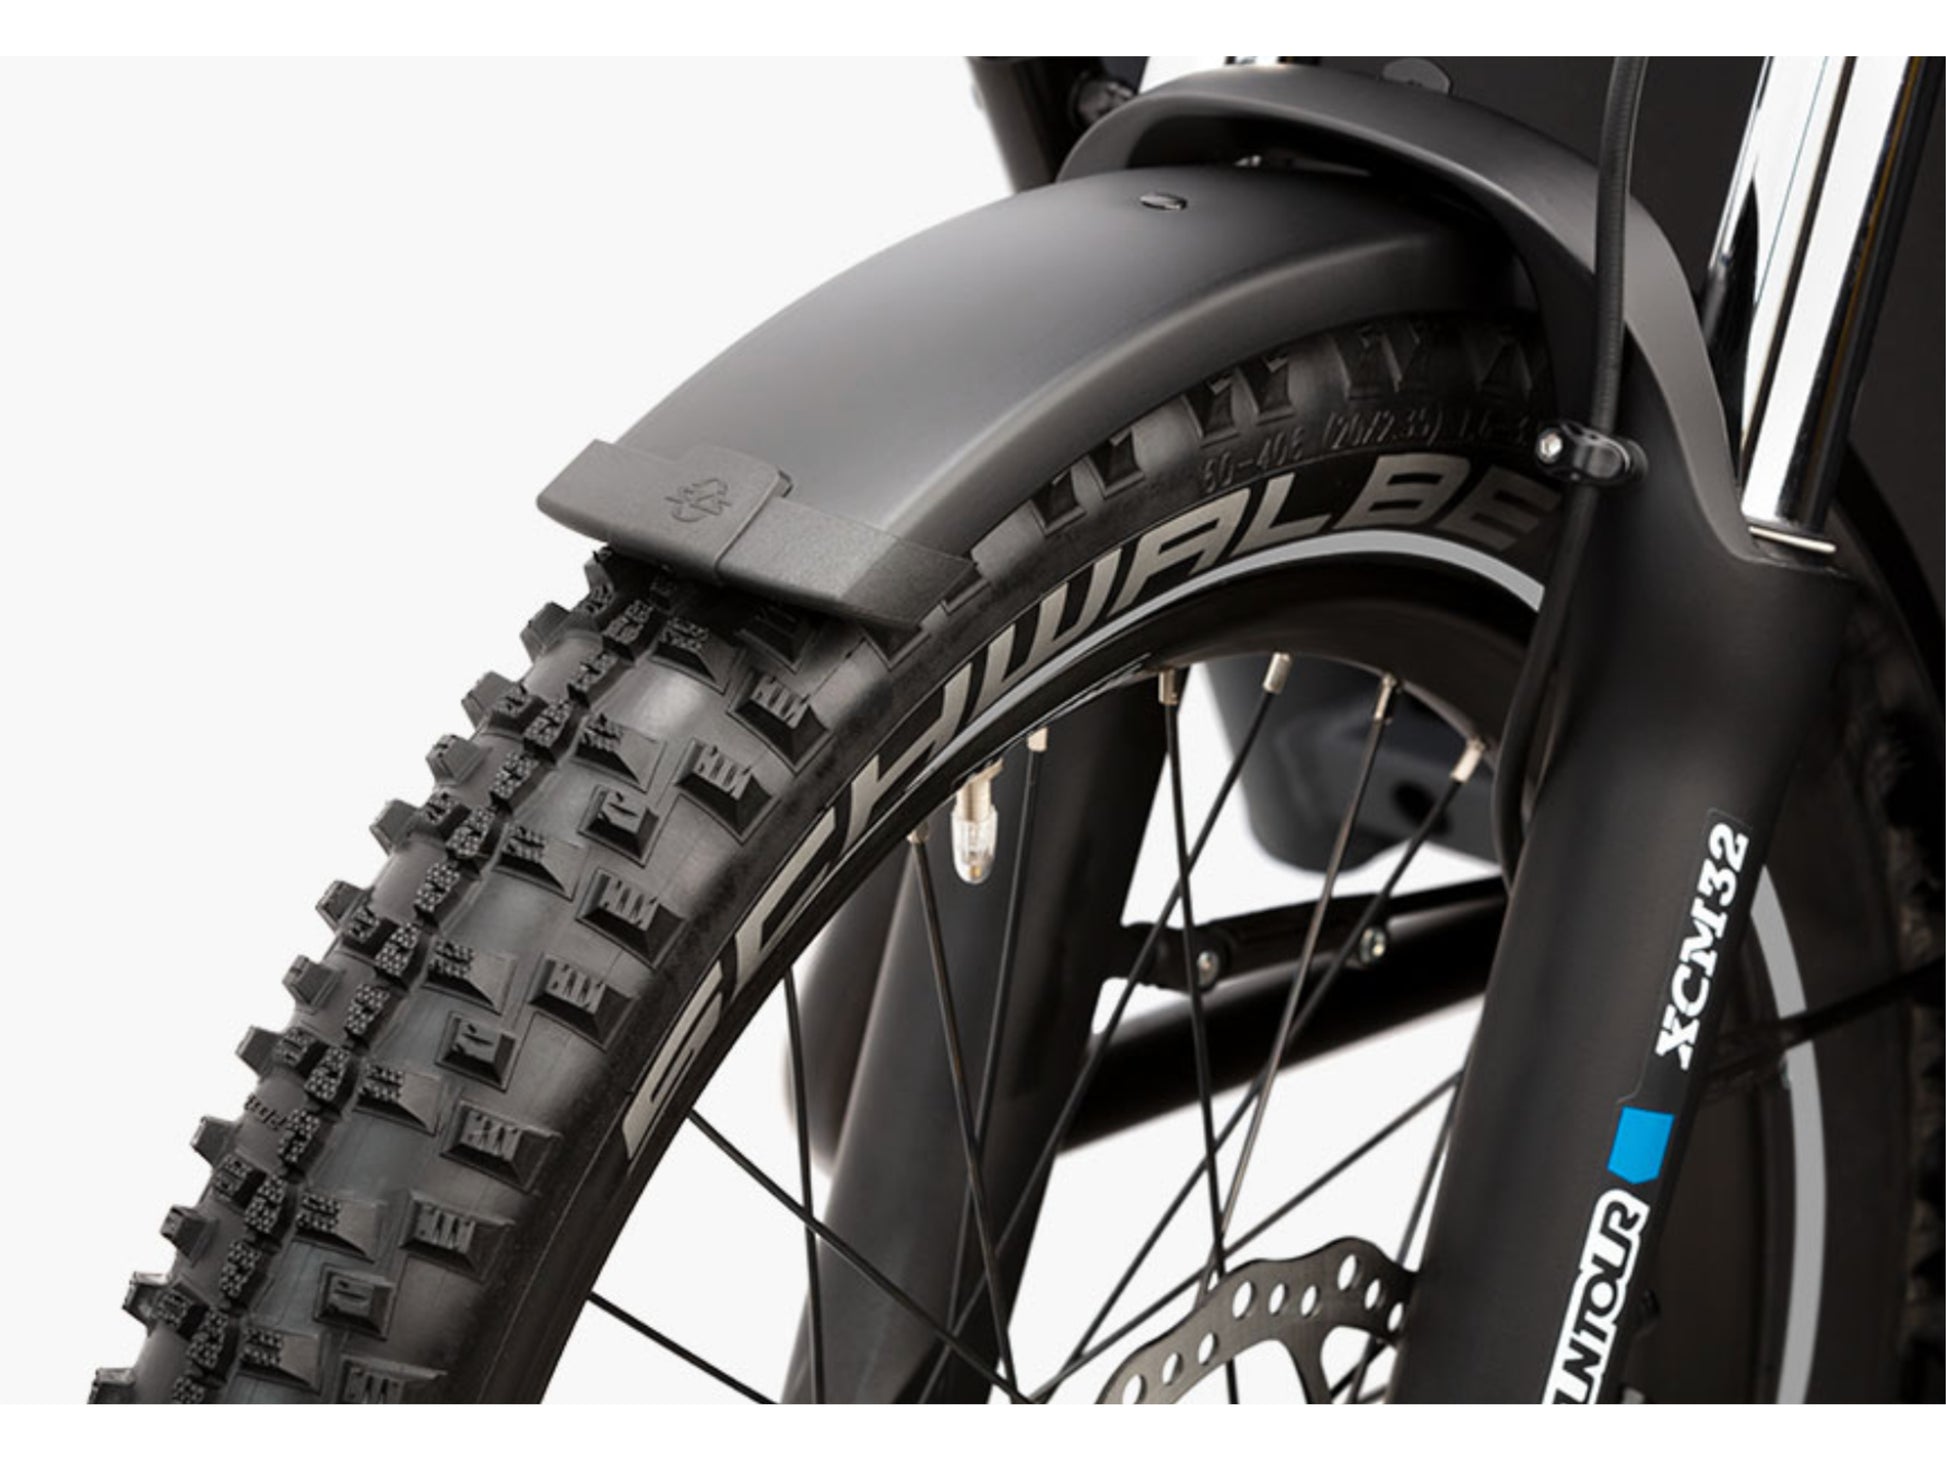 Riese & Muller Packster 70 Touring cargo eMTB hardtail close up gx option